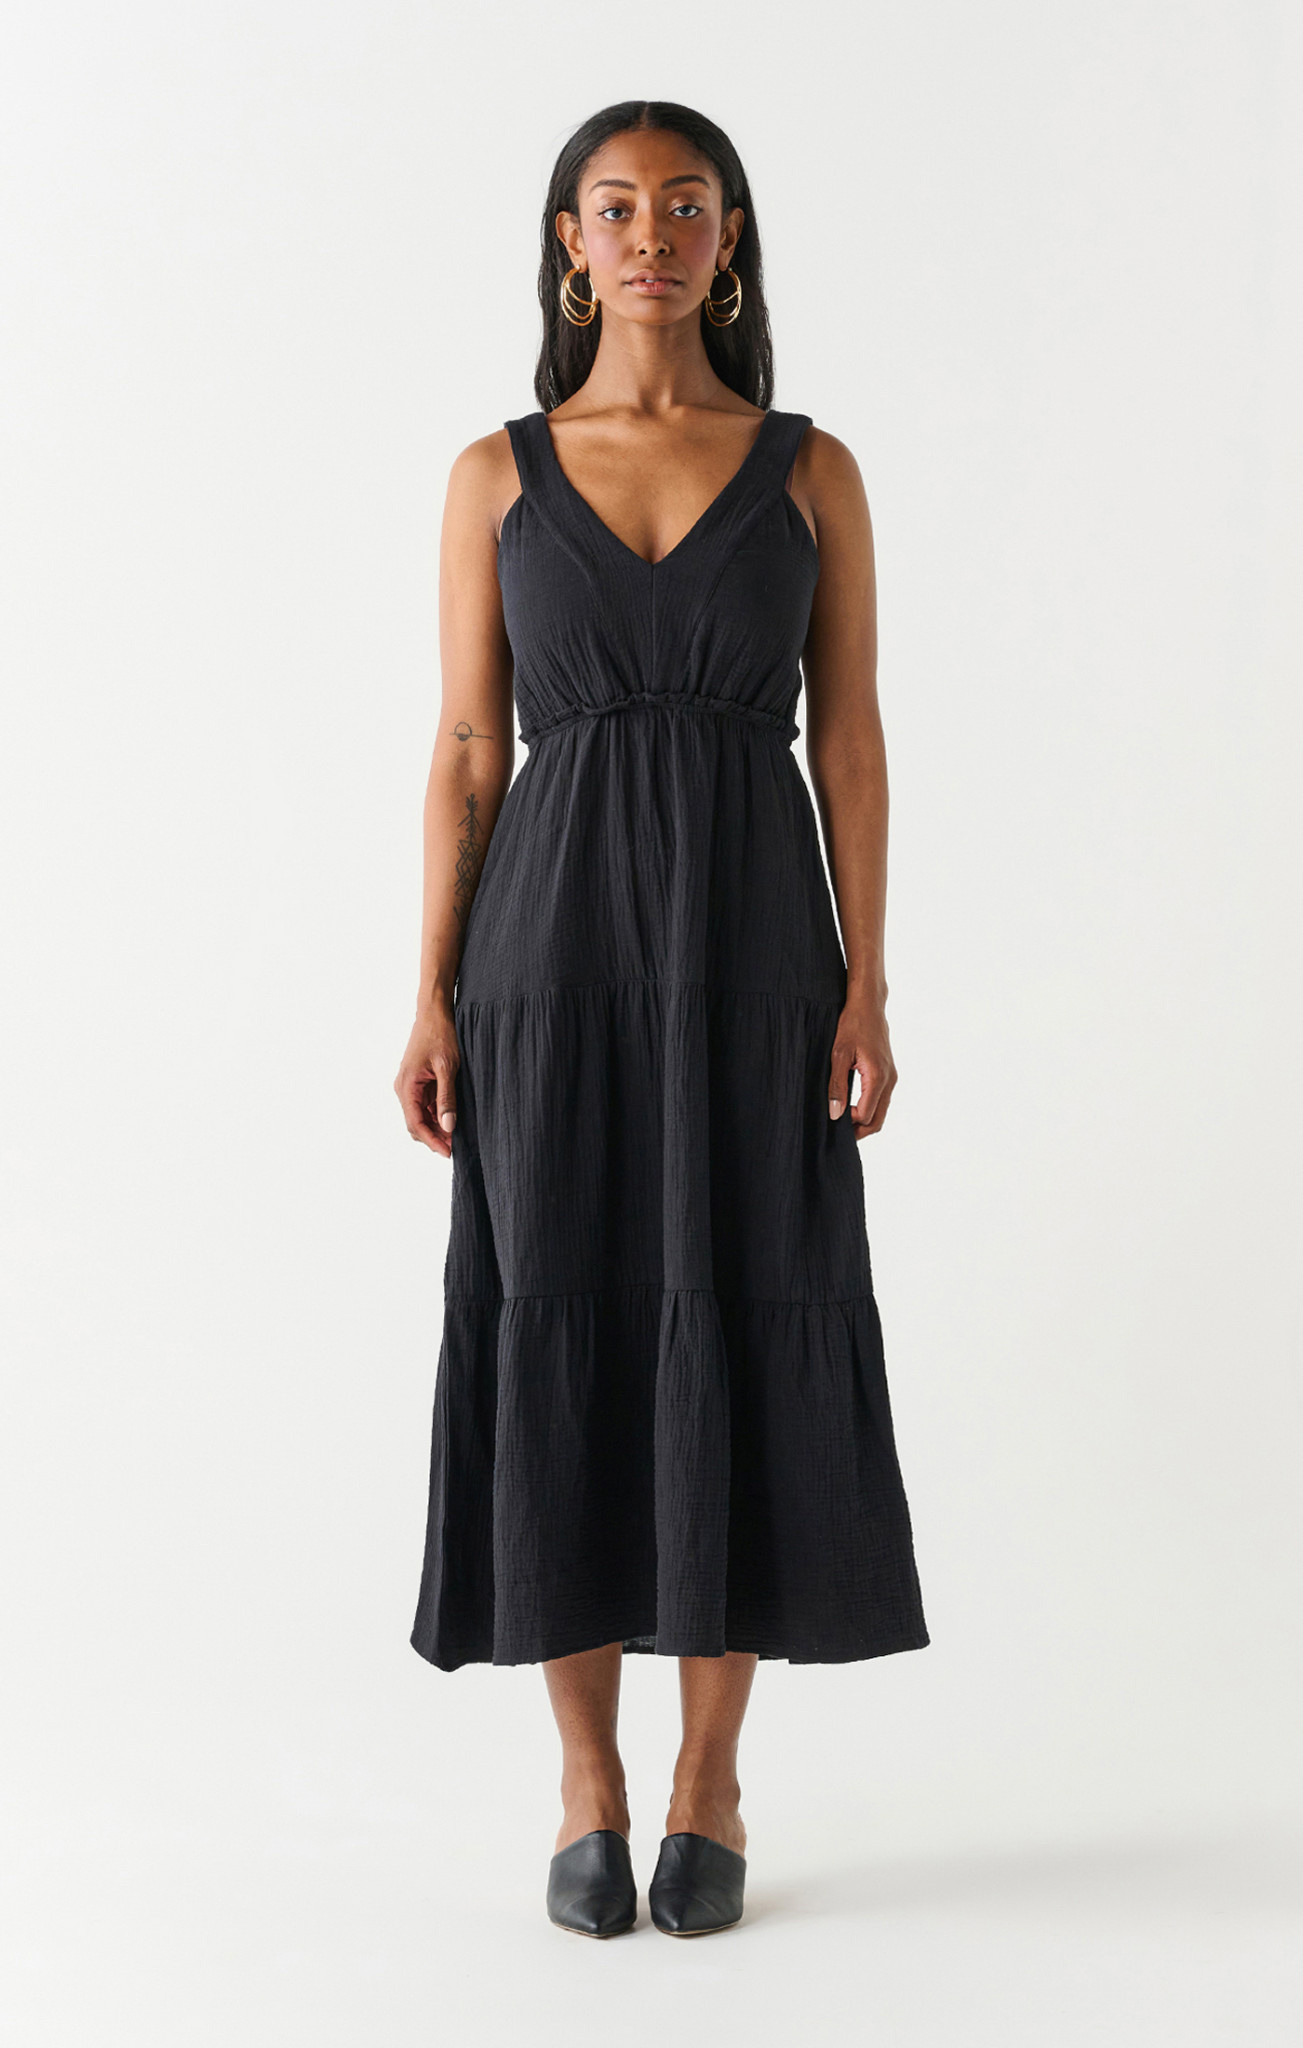 Duluth Trading Company Cotton Midi Dresses for Women